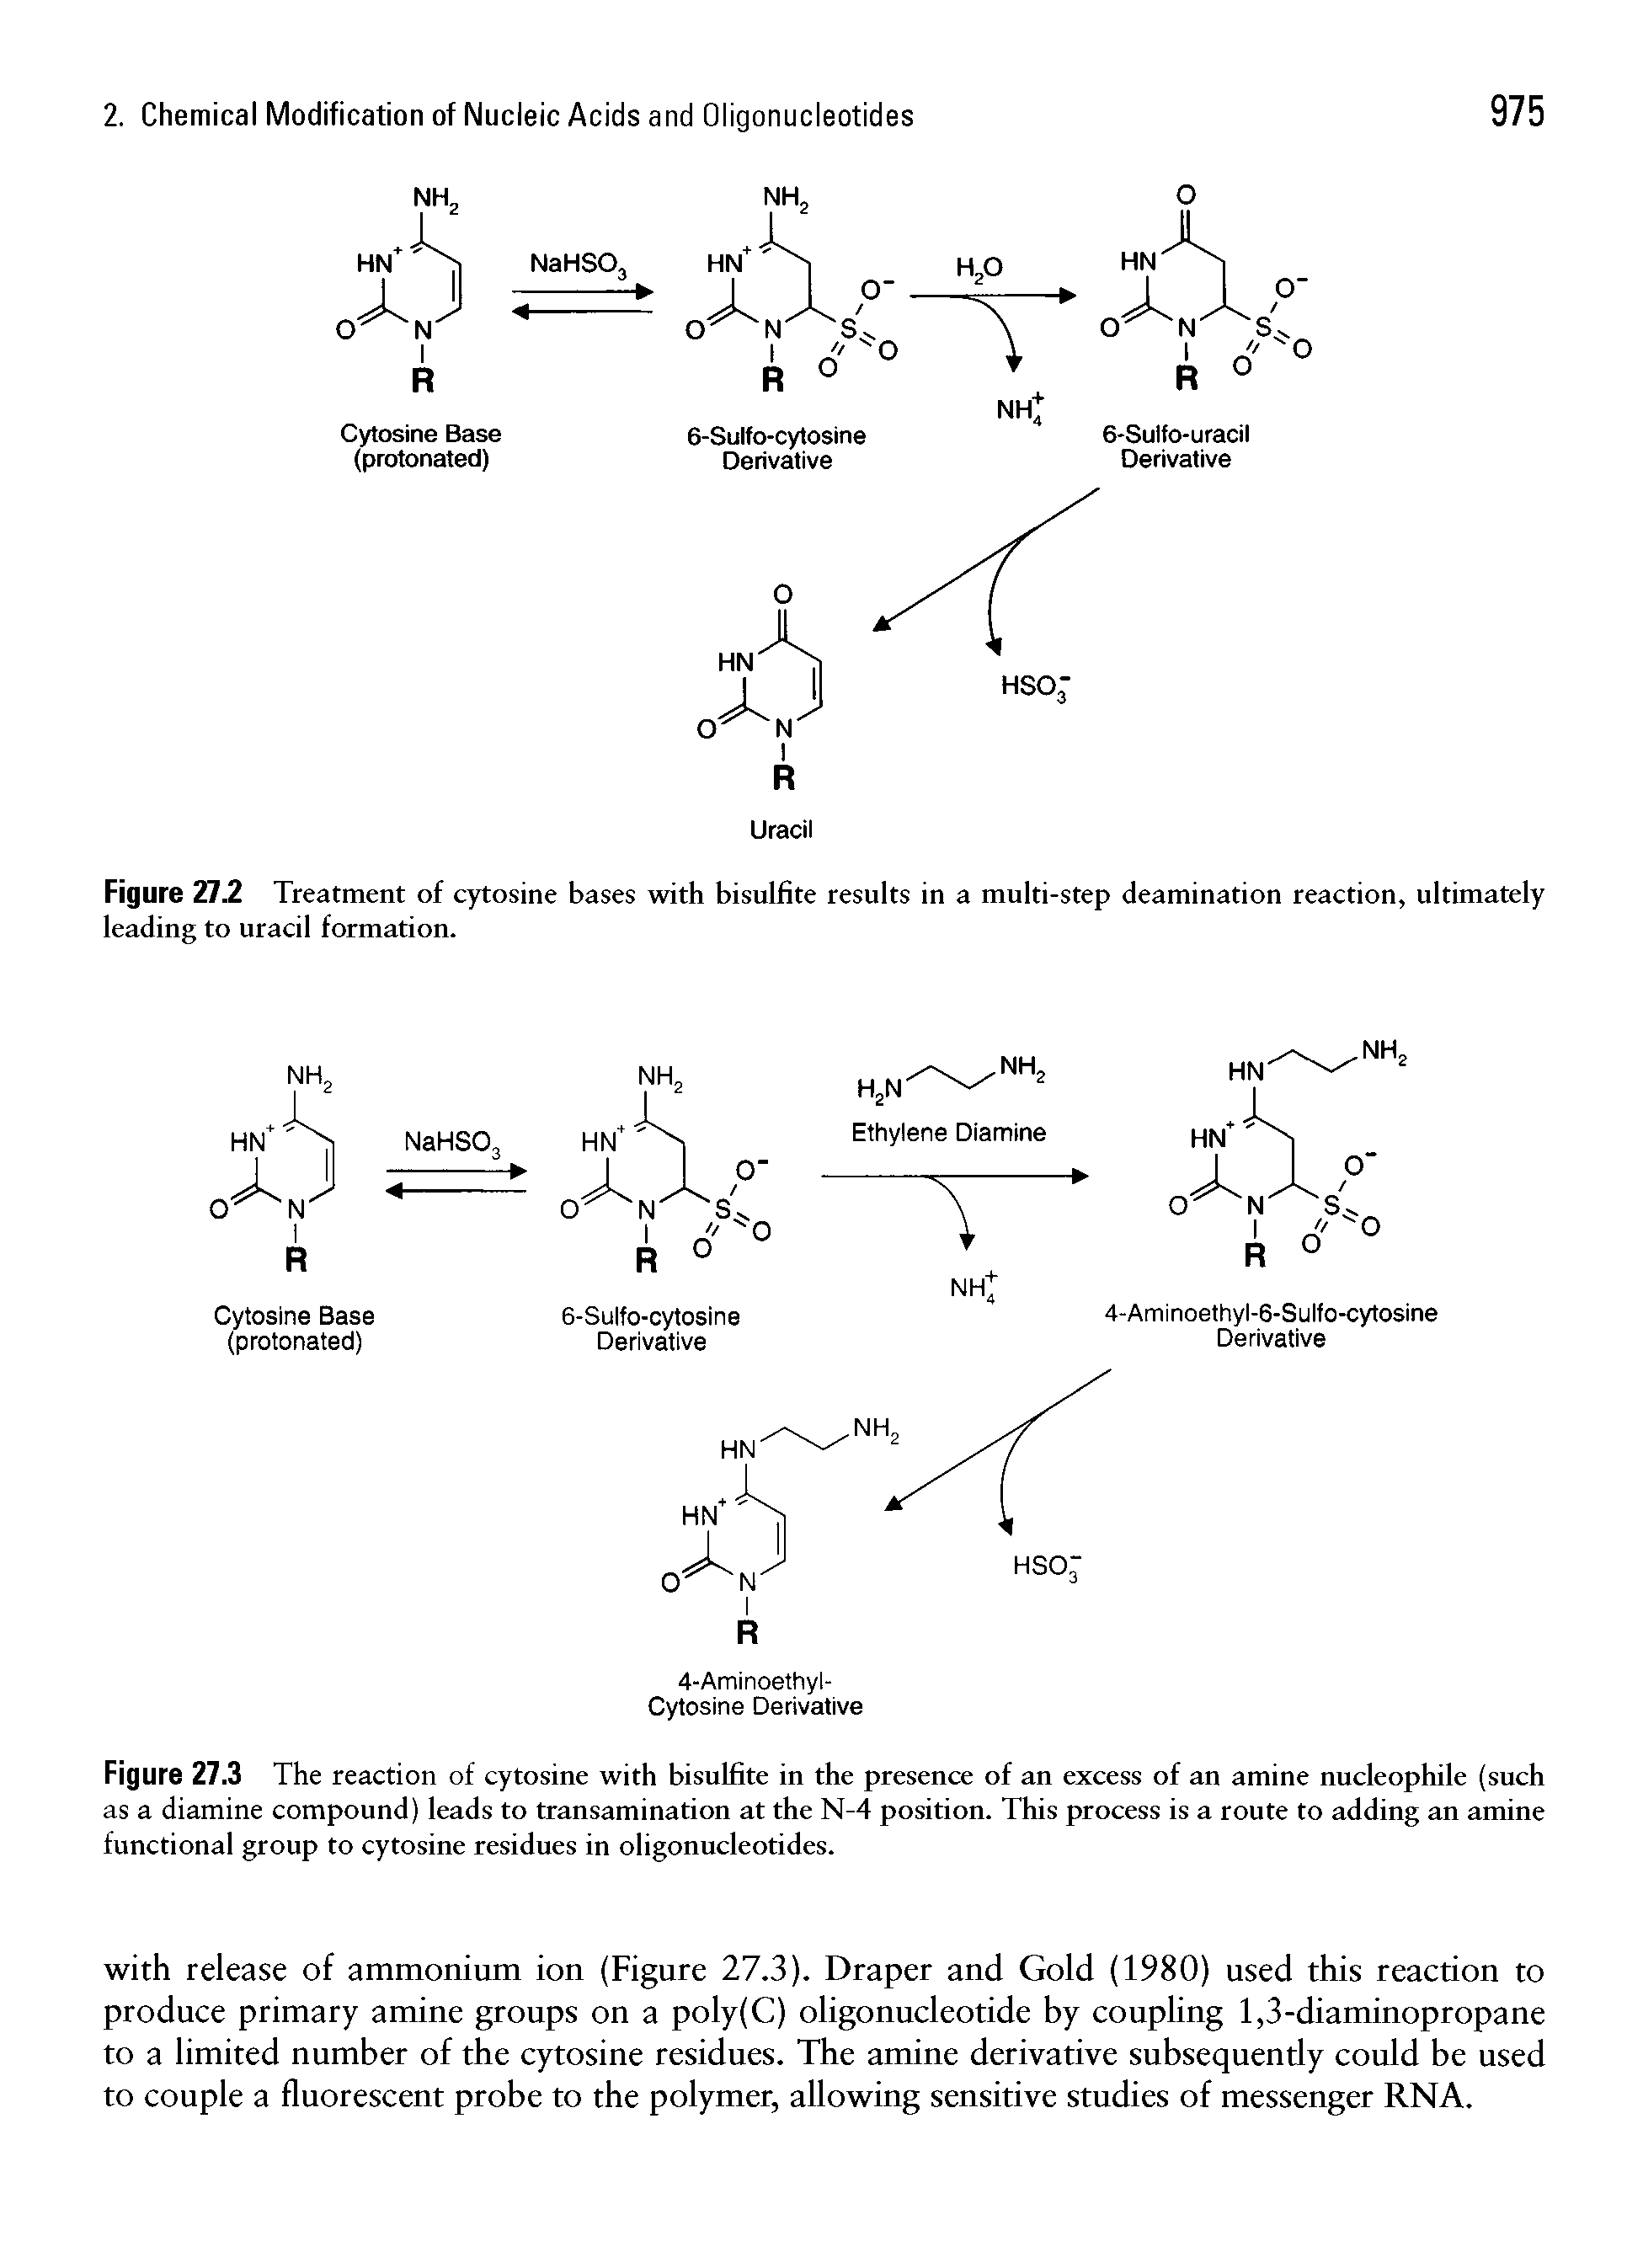 Figure 27.2 Treatment of cytosine bases with bisulfite results in a multi-step deamination reaction, ultimately leading to uracil formation.